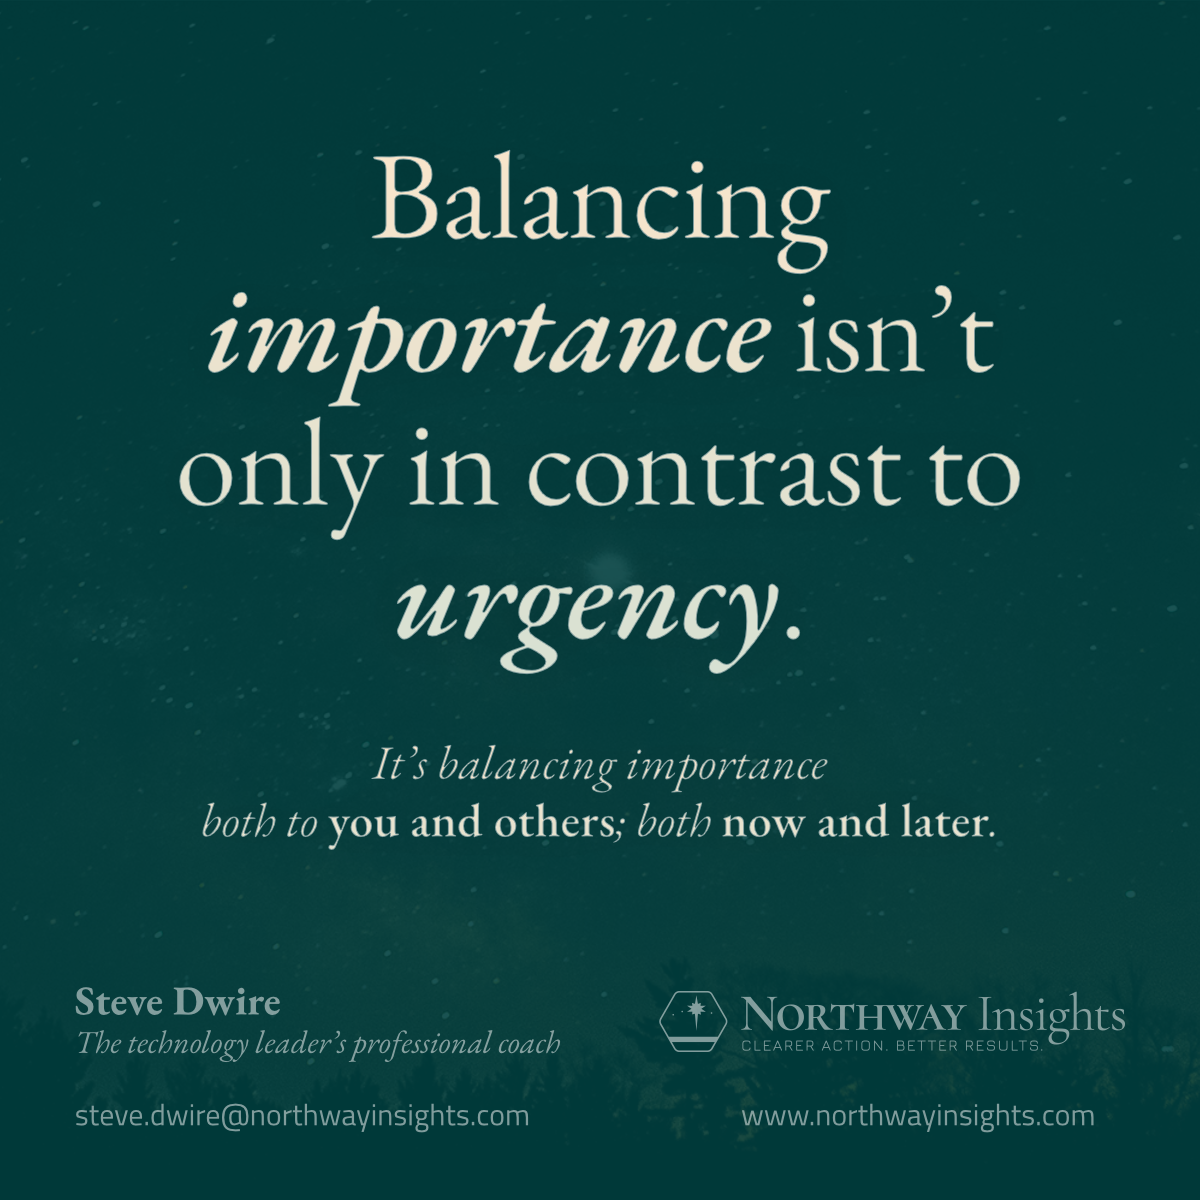 Balancing importance isn't only in contrast to urgency. (It's balancing importance both to you and others; both now and later.)